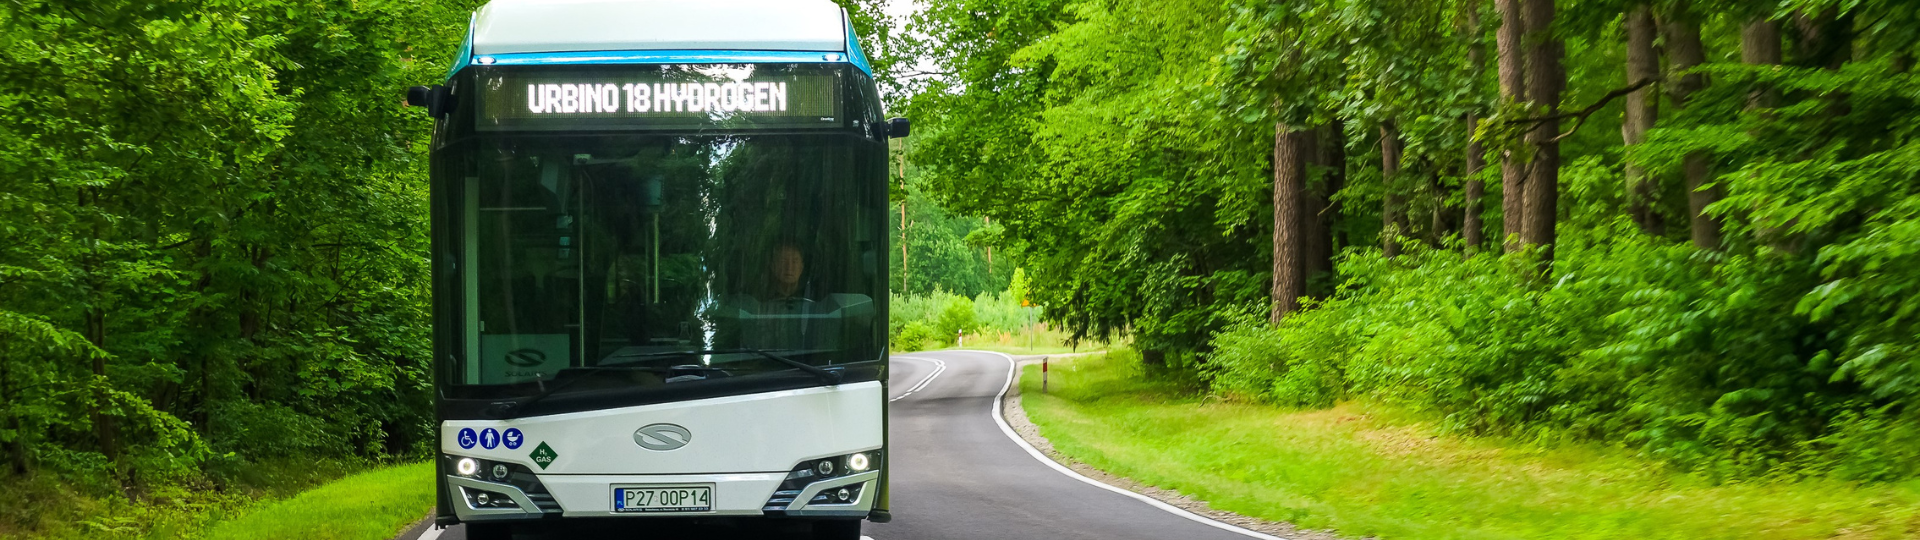 Güstrow places order for 52 hydrogen buses